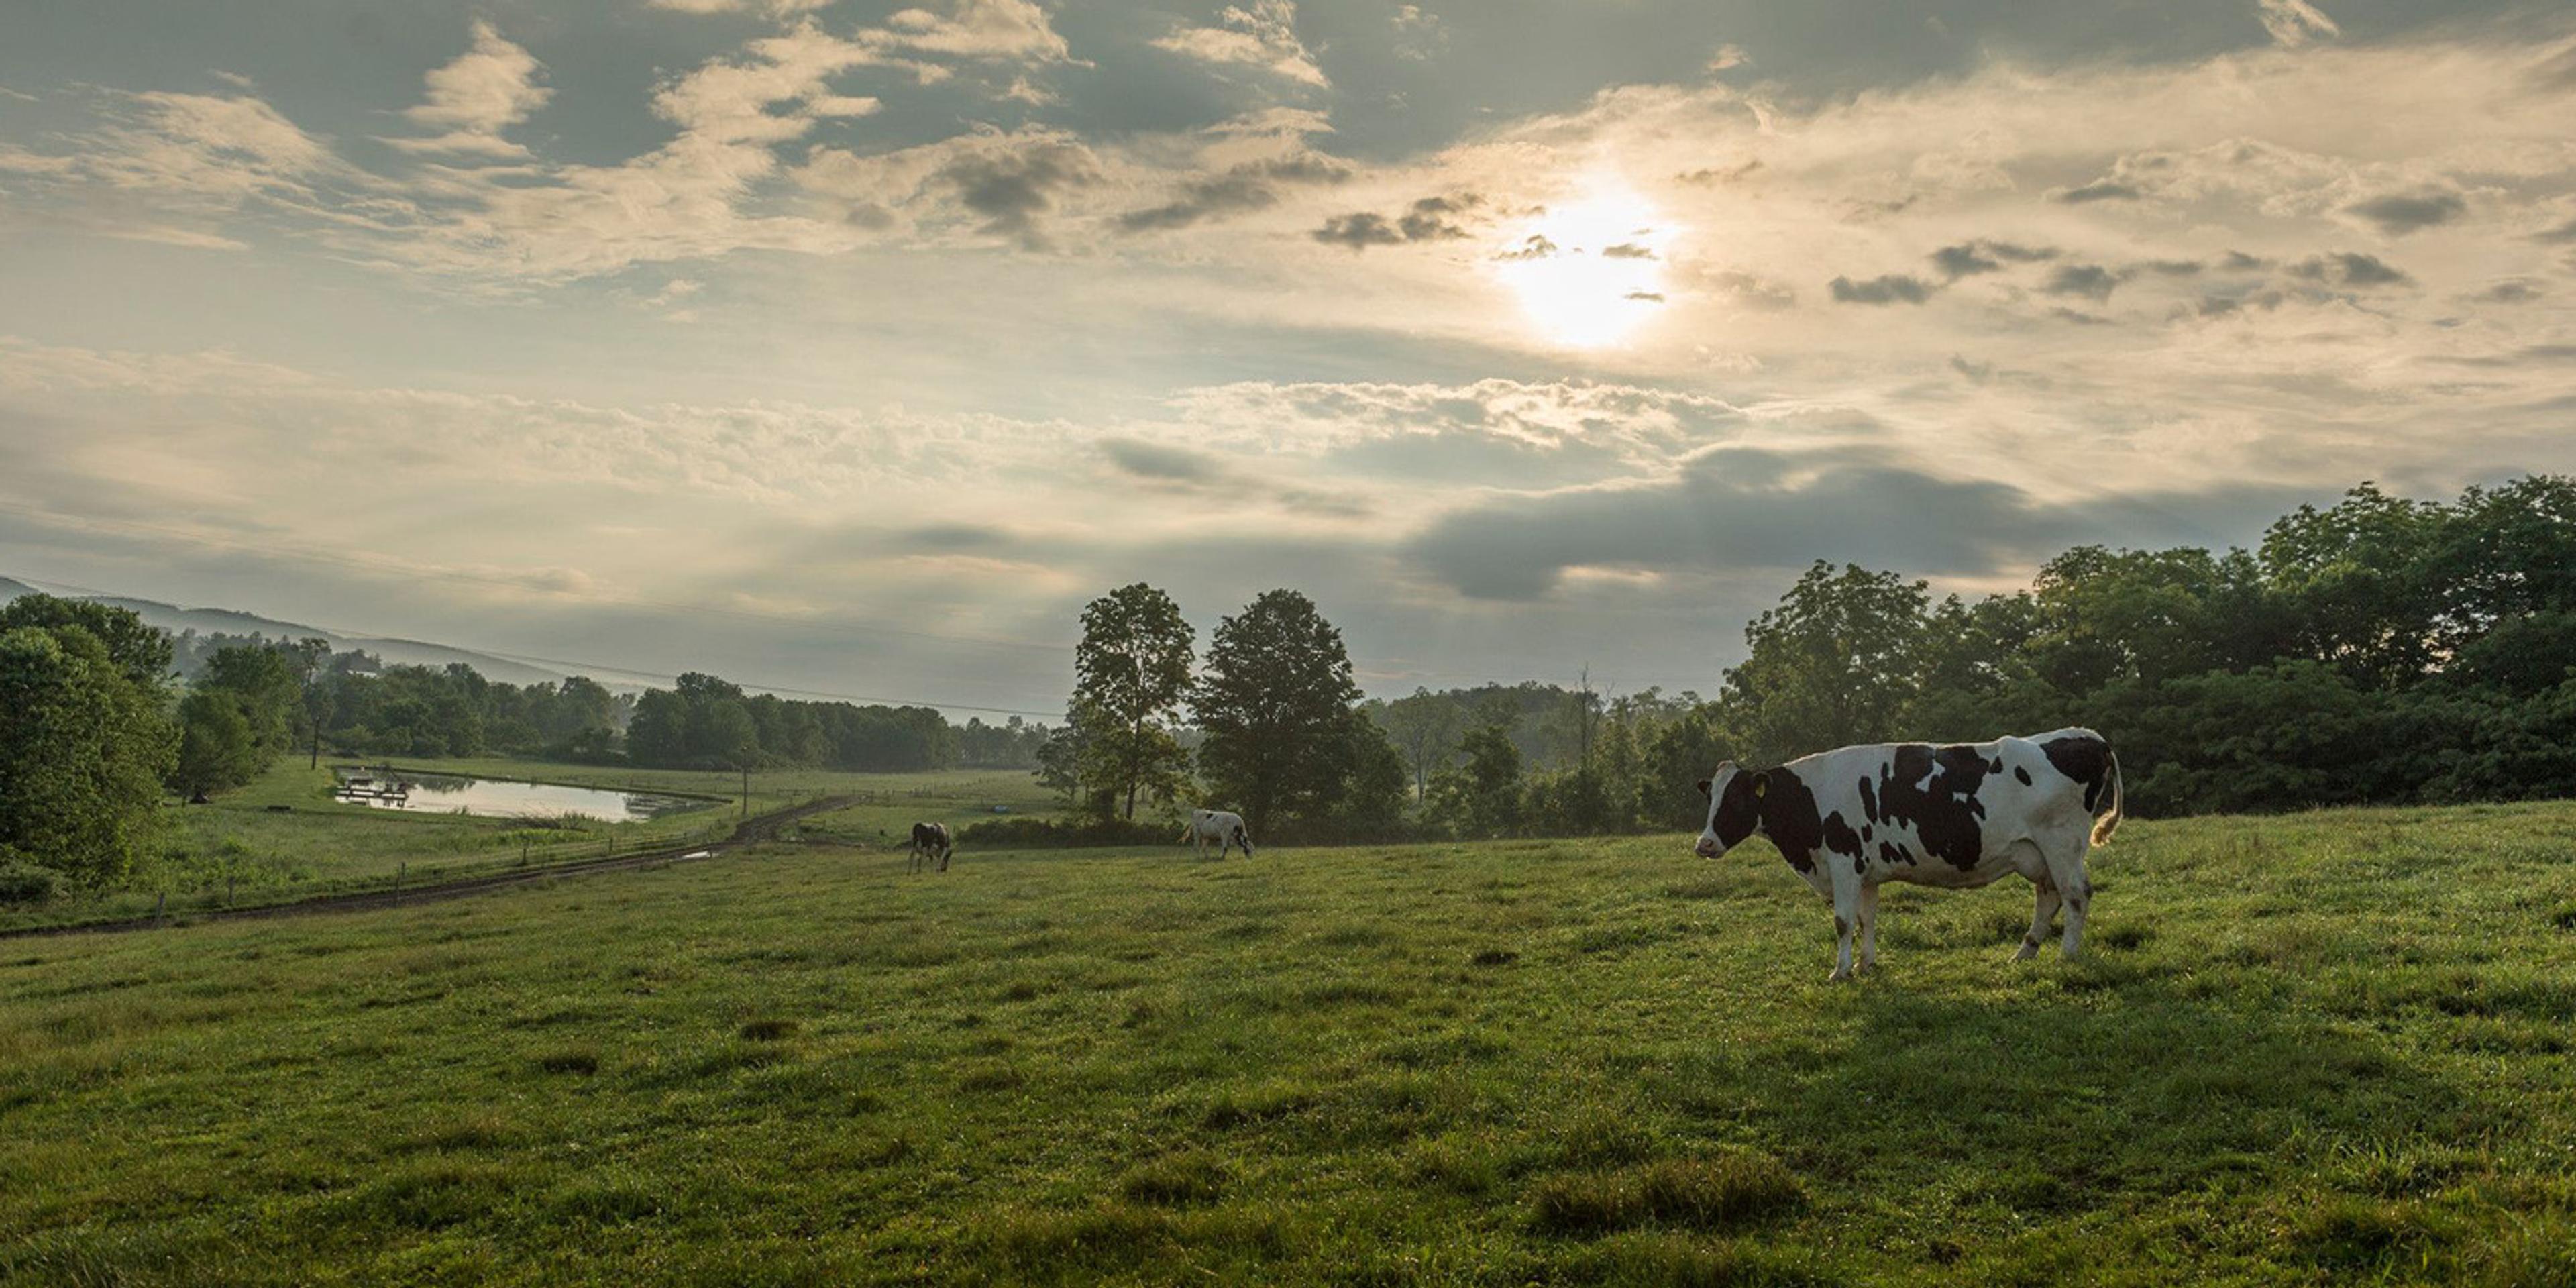 Cows on pasture in Pennsylvania.